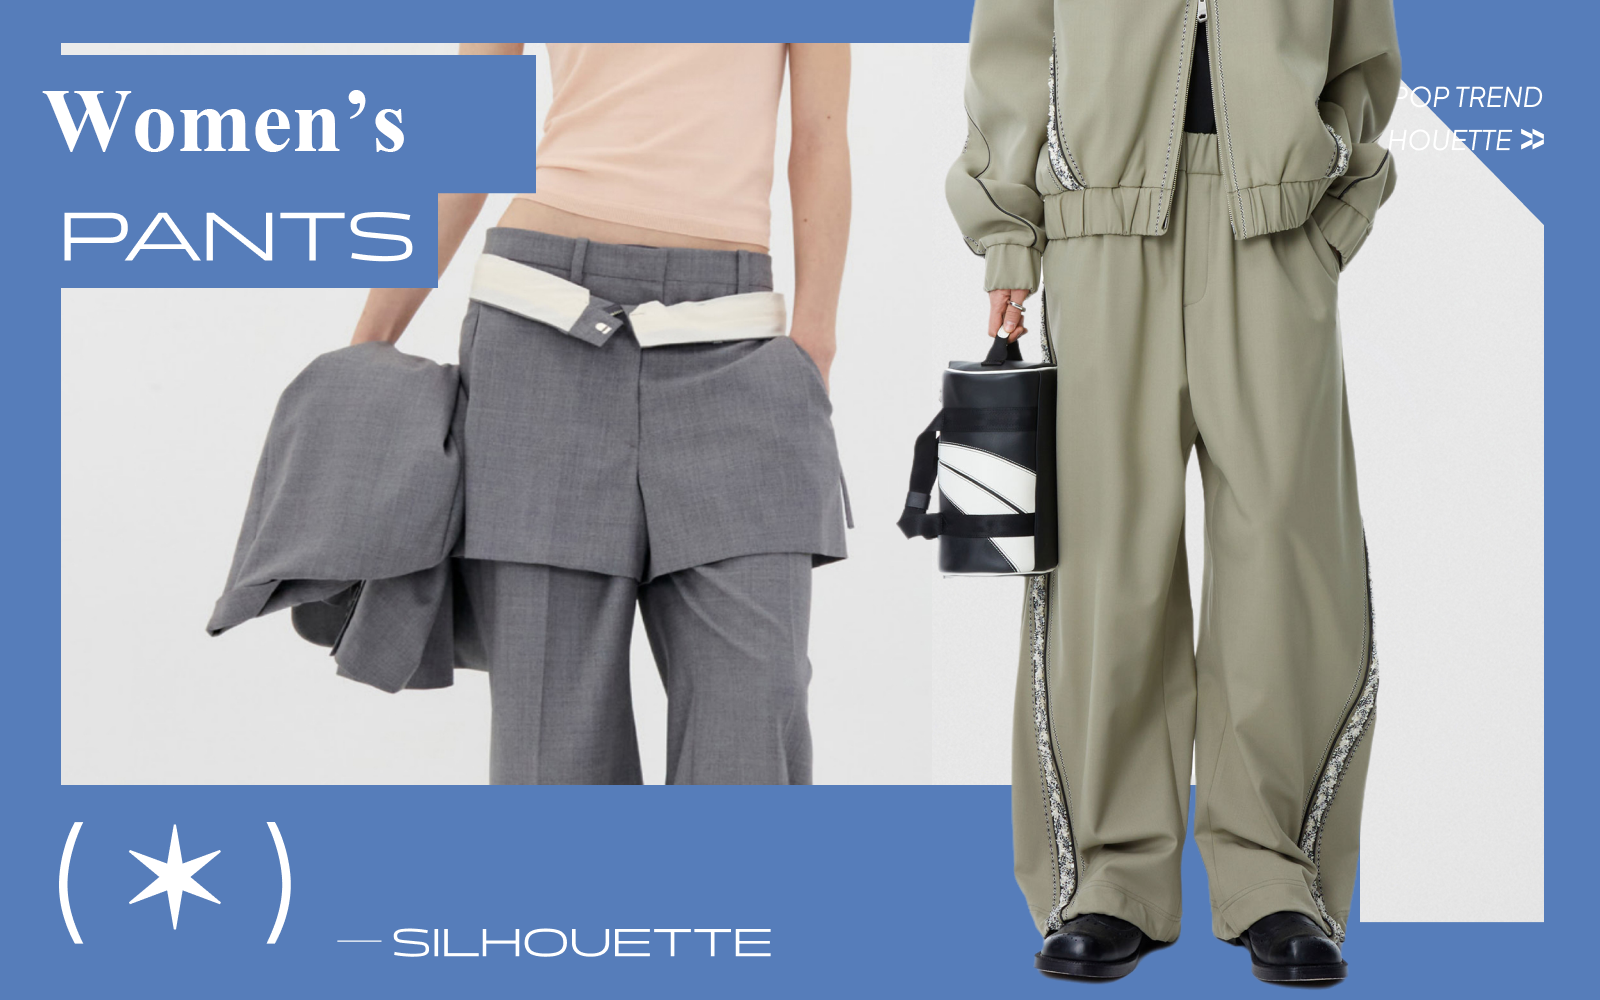 Commuting -- The Silhouette Trend for Women's Pants